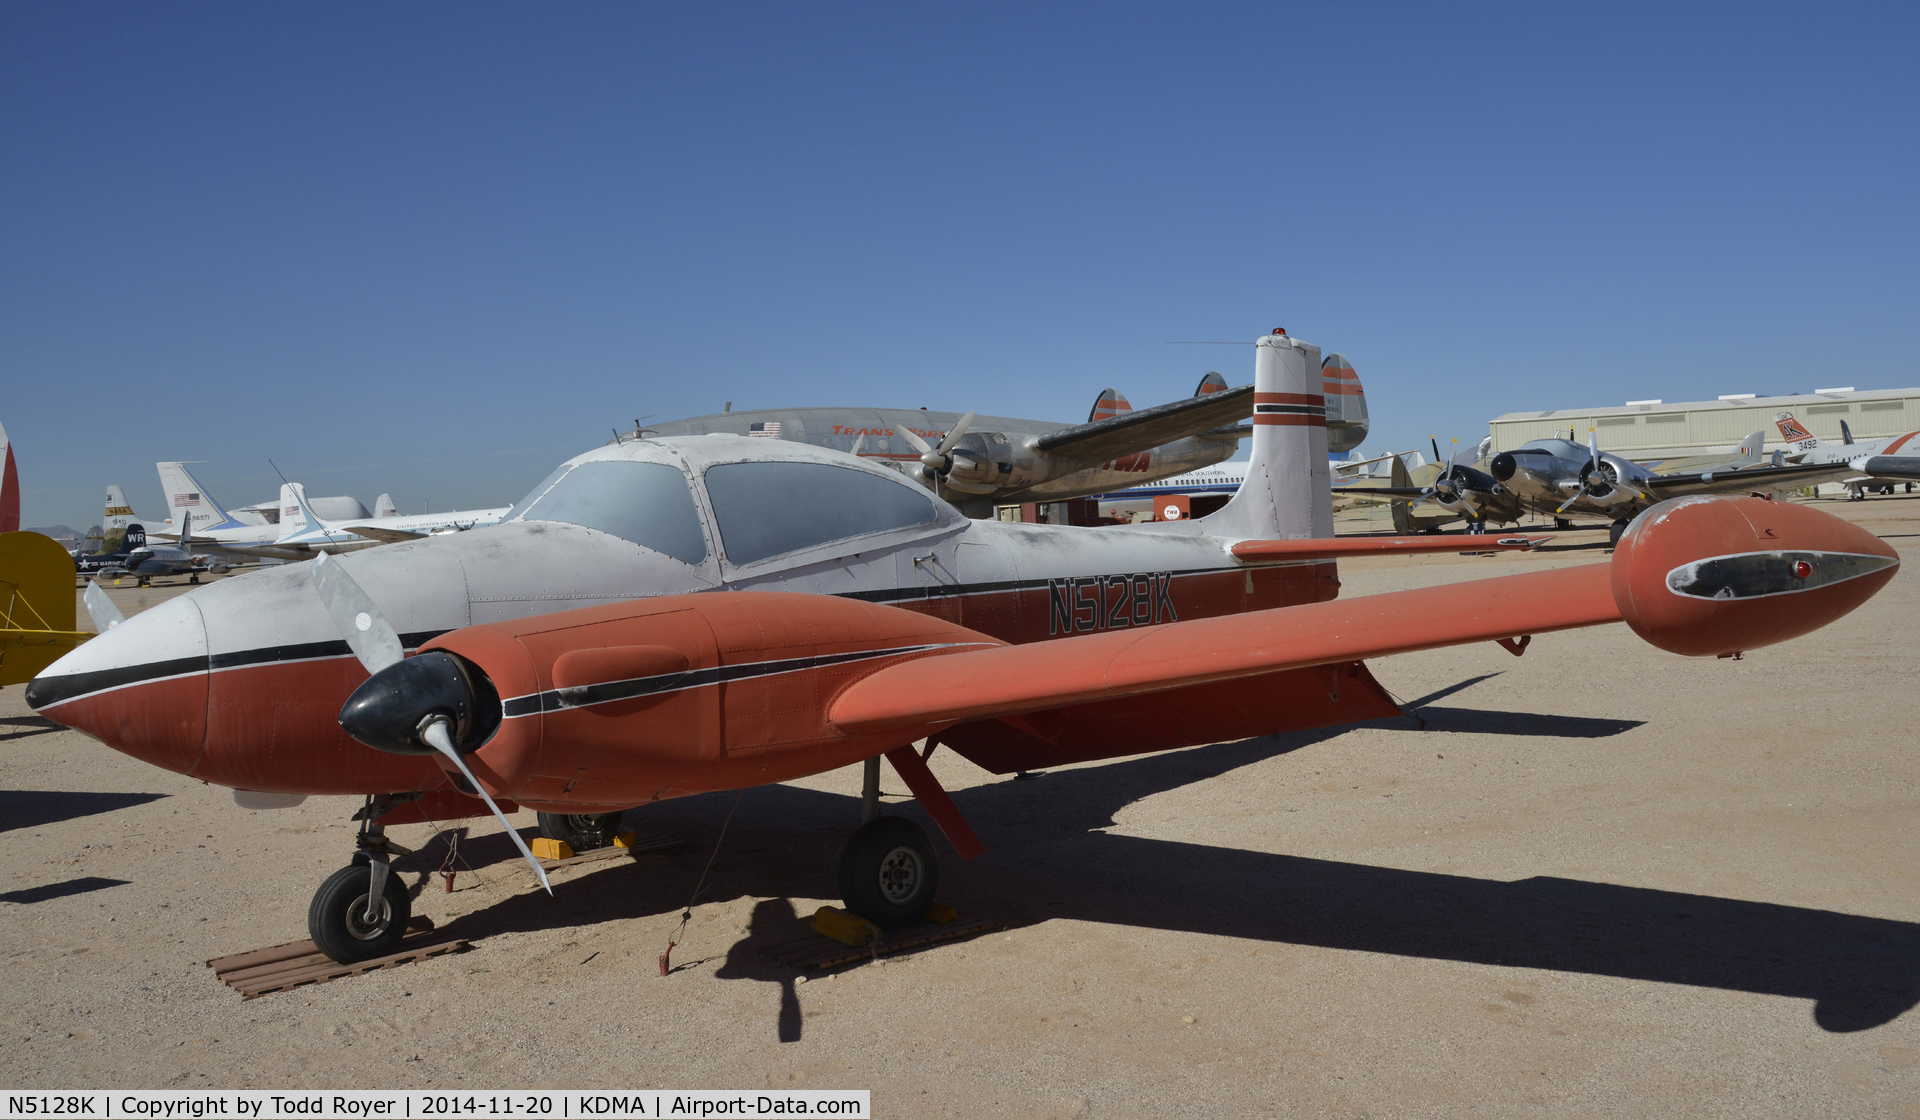 N5128K, Riley-Temco D-16 Twin Navion C/N TTN-29 (NAV-4-2028B), On display at the Pima Air and Space Museum